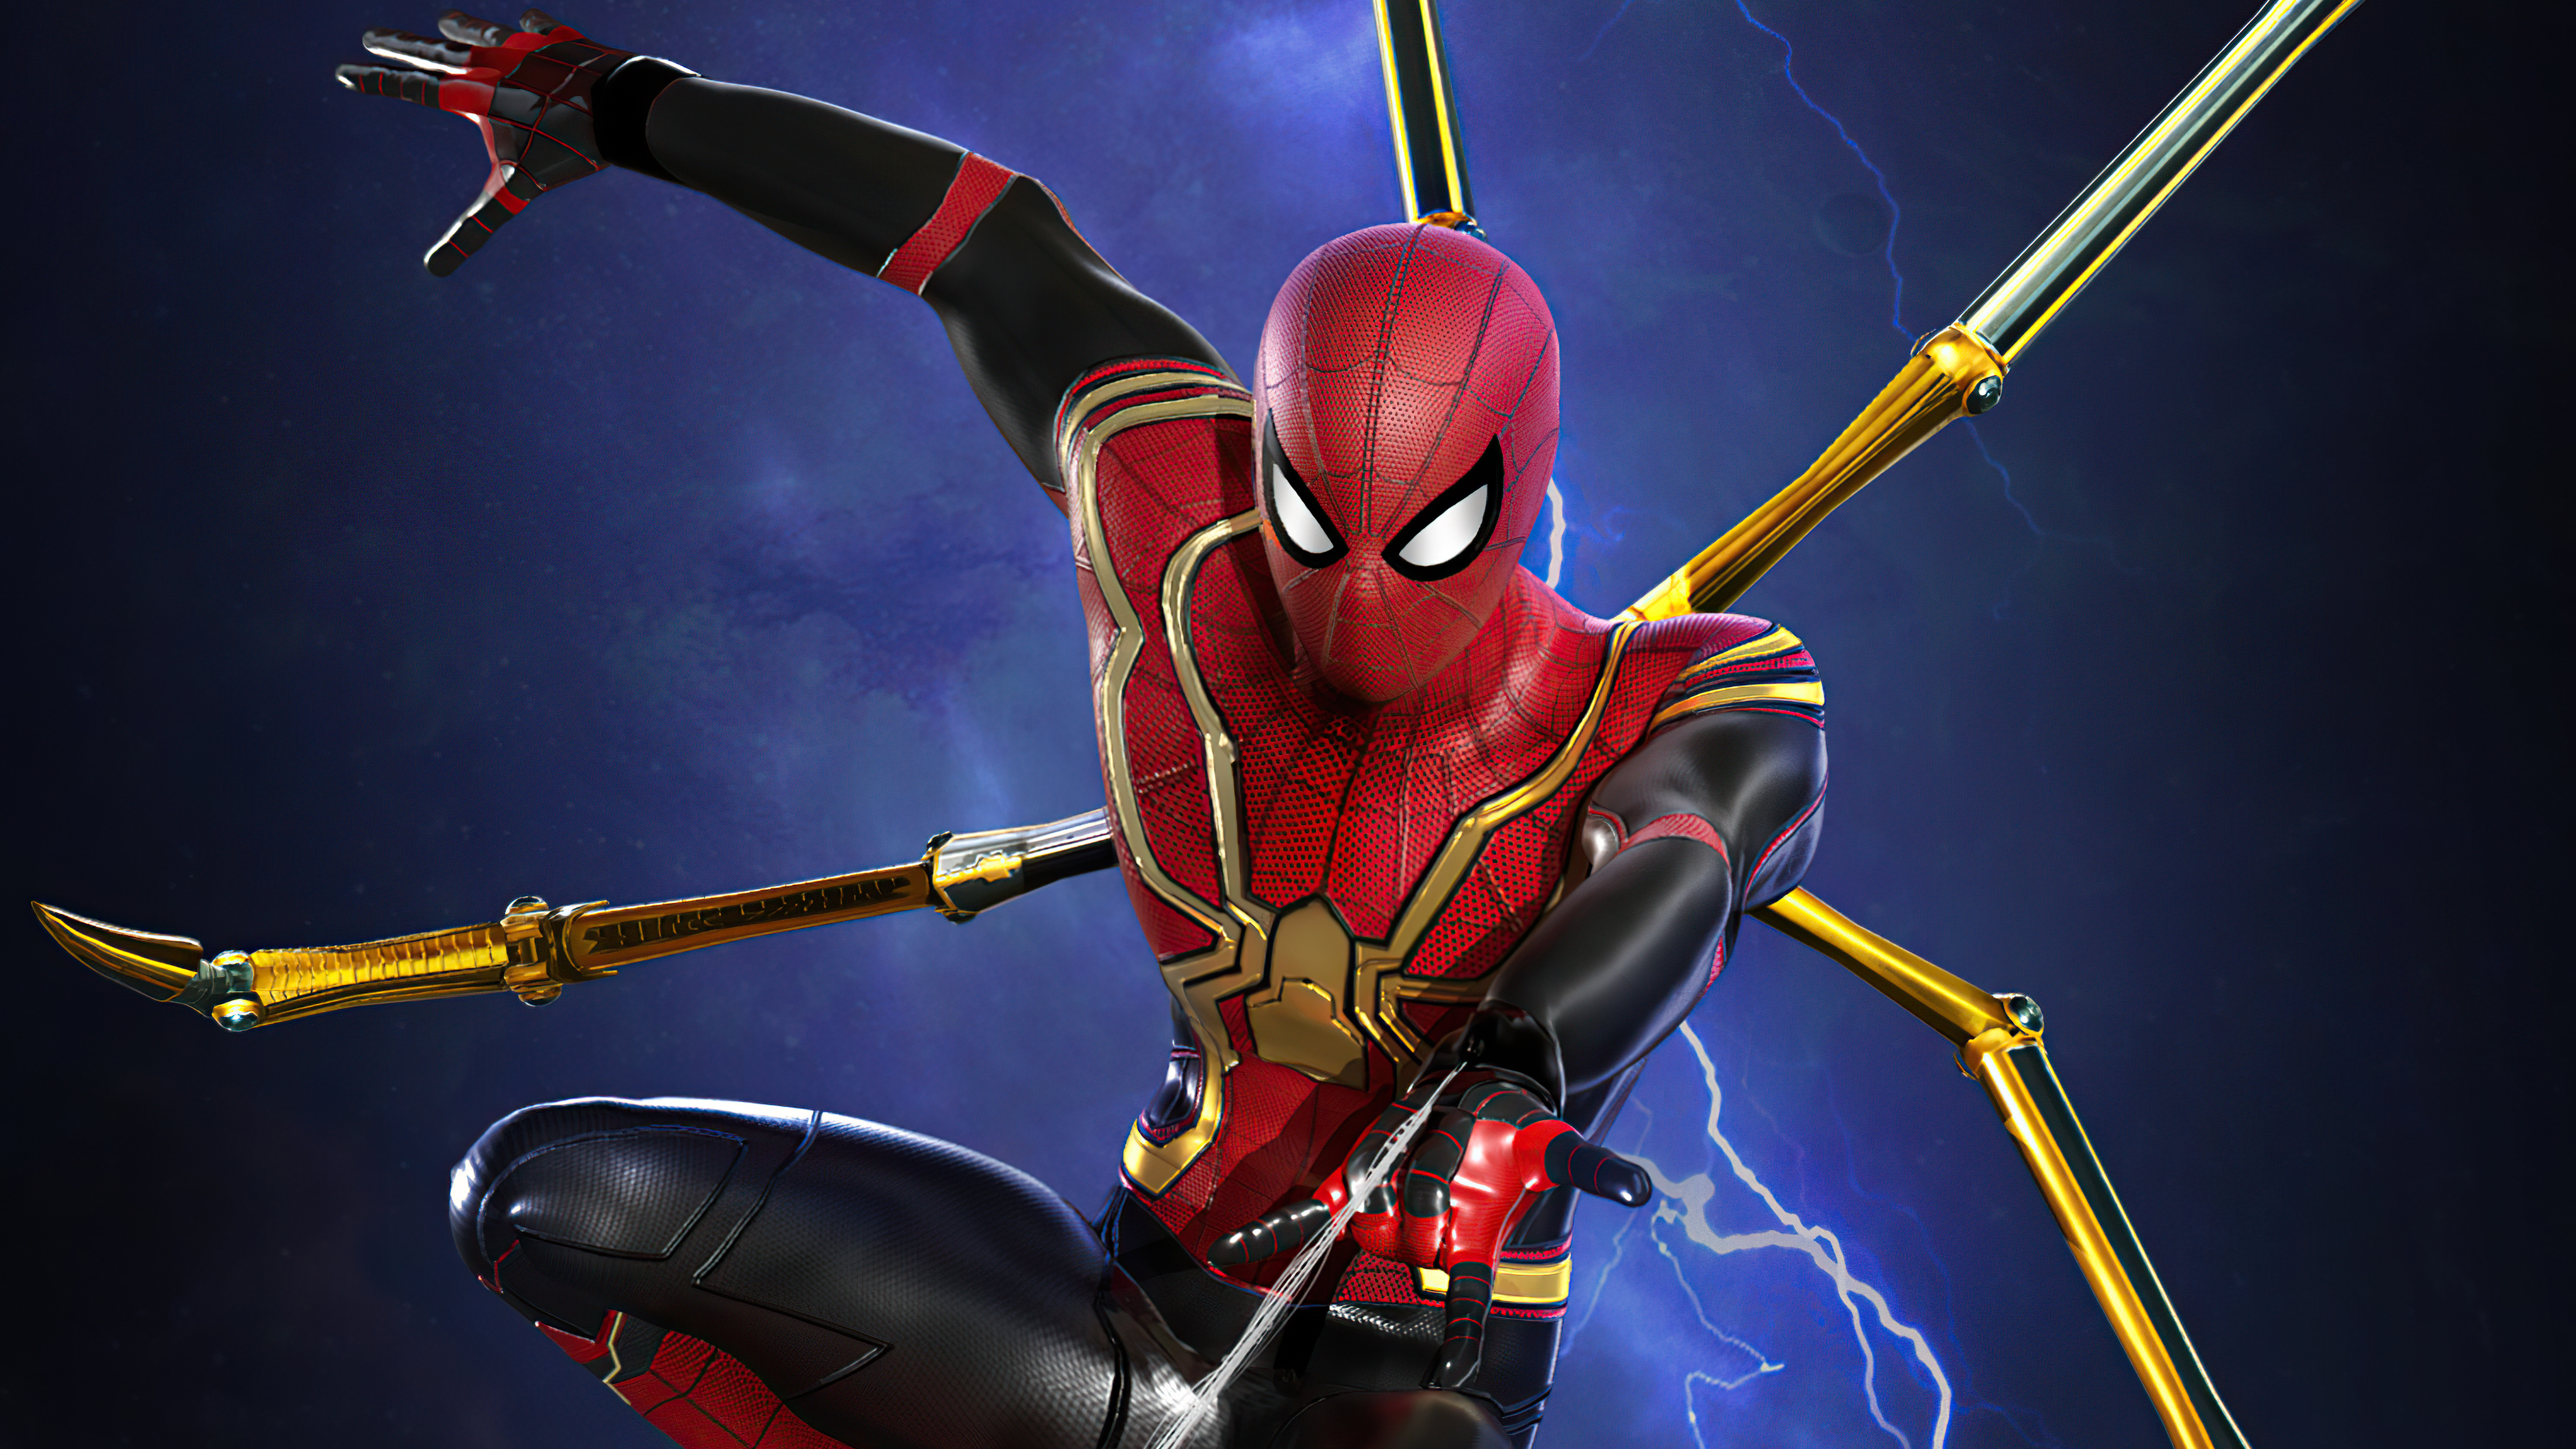 Wallpaper 3d spiderman APK 11 for Android  Download Wallpaper 3d spiderman  APK Latest Version from APKFabcom